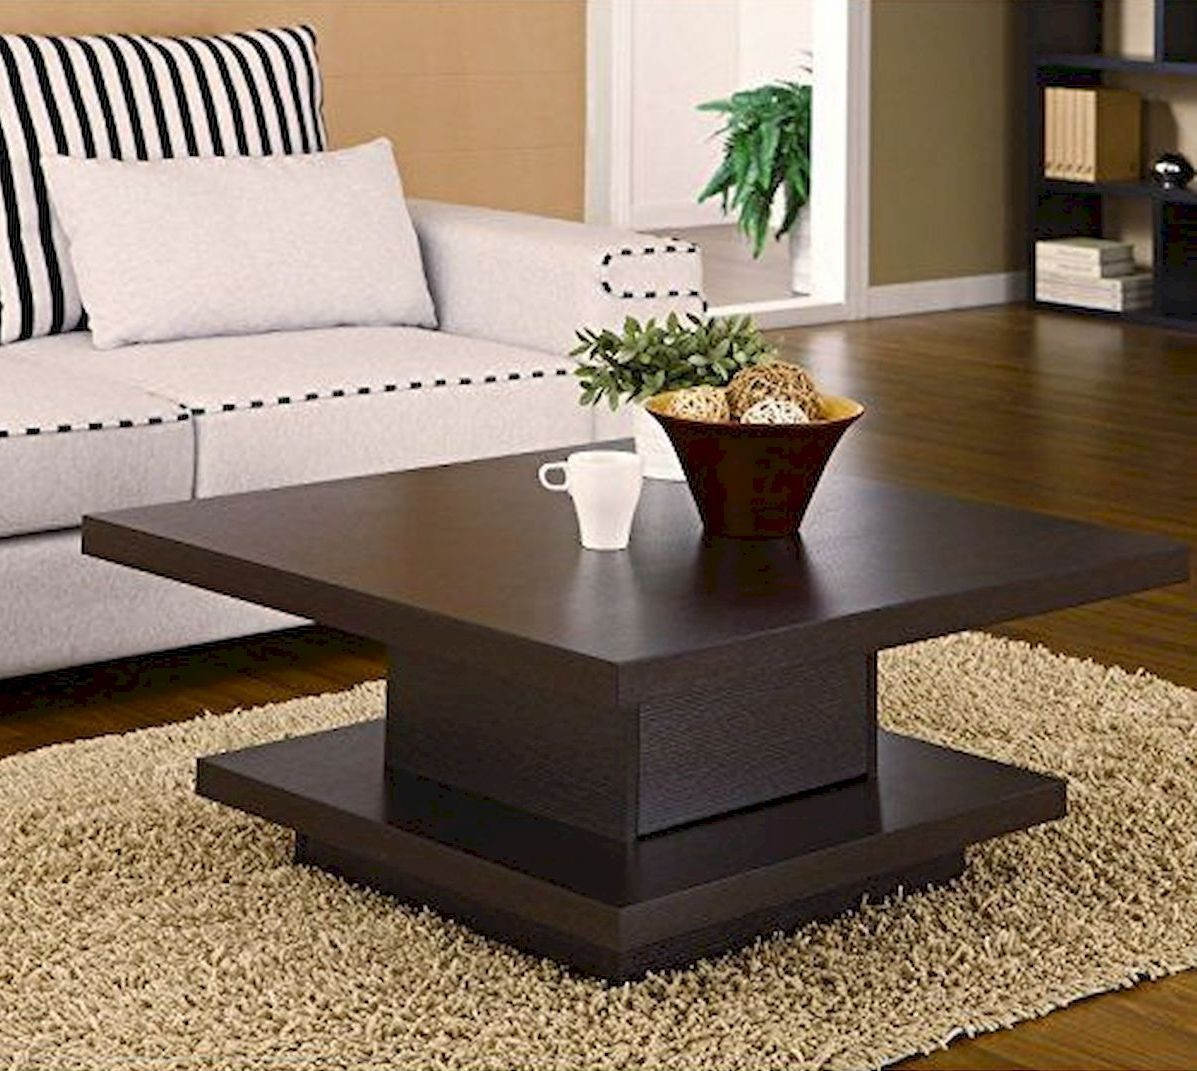 Living Room Center Table Decor
 Coffee Table Ideas for Your Living Room